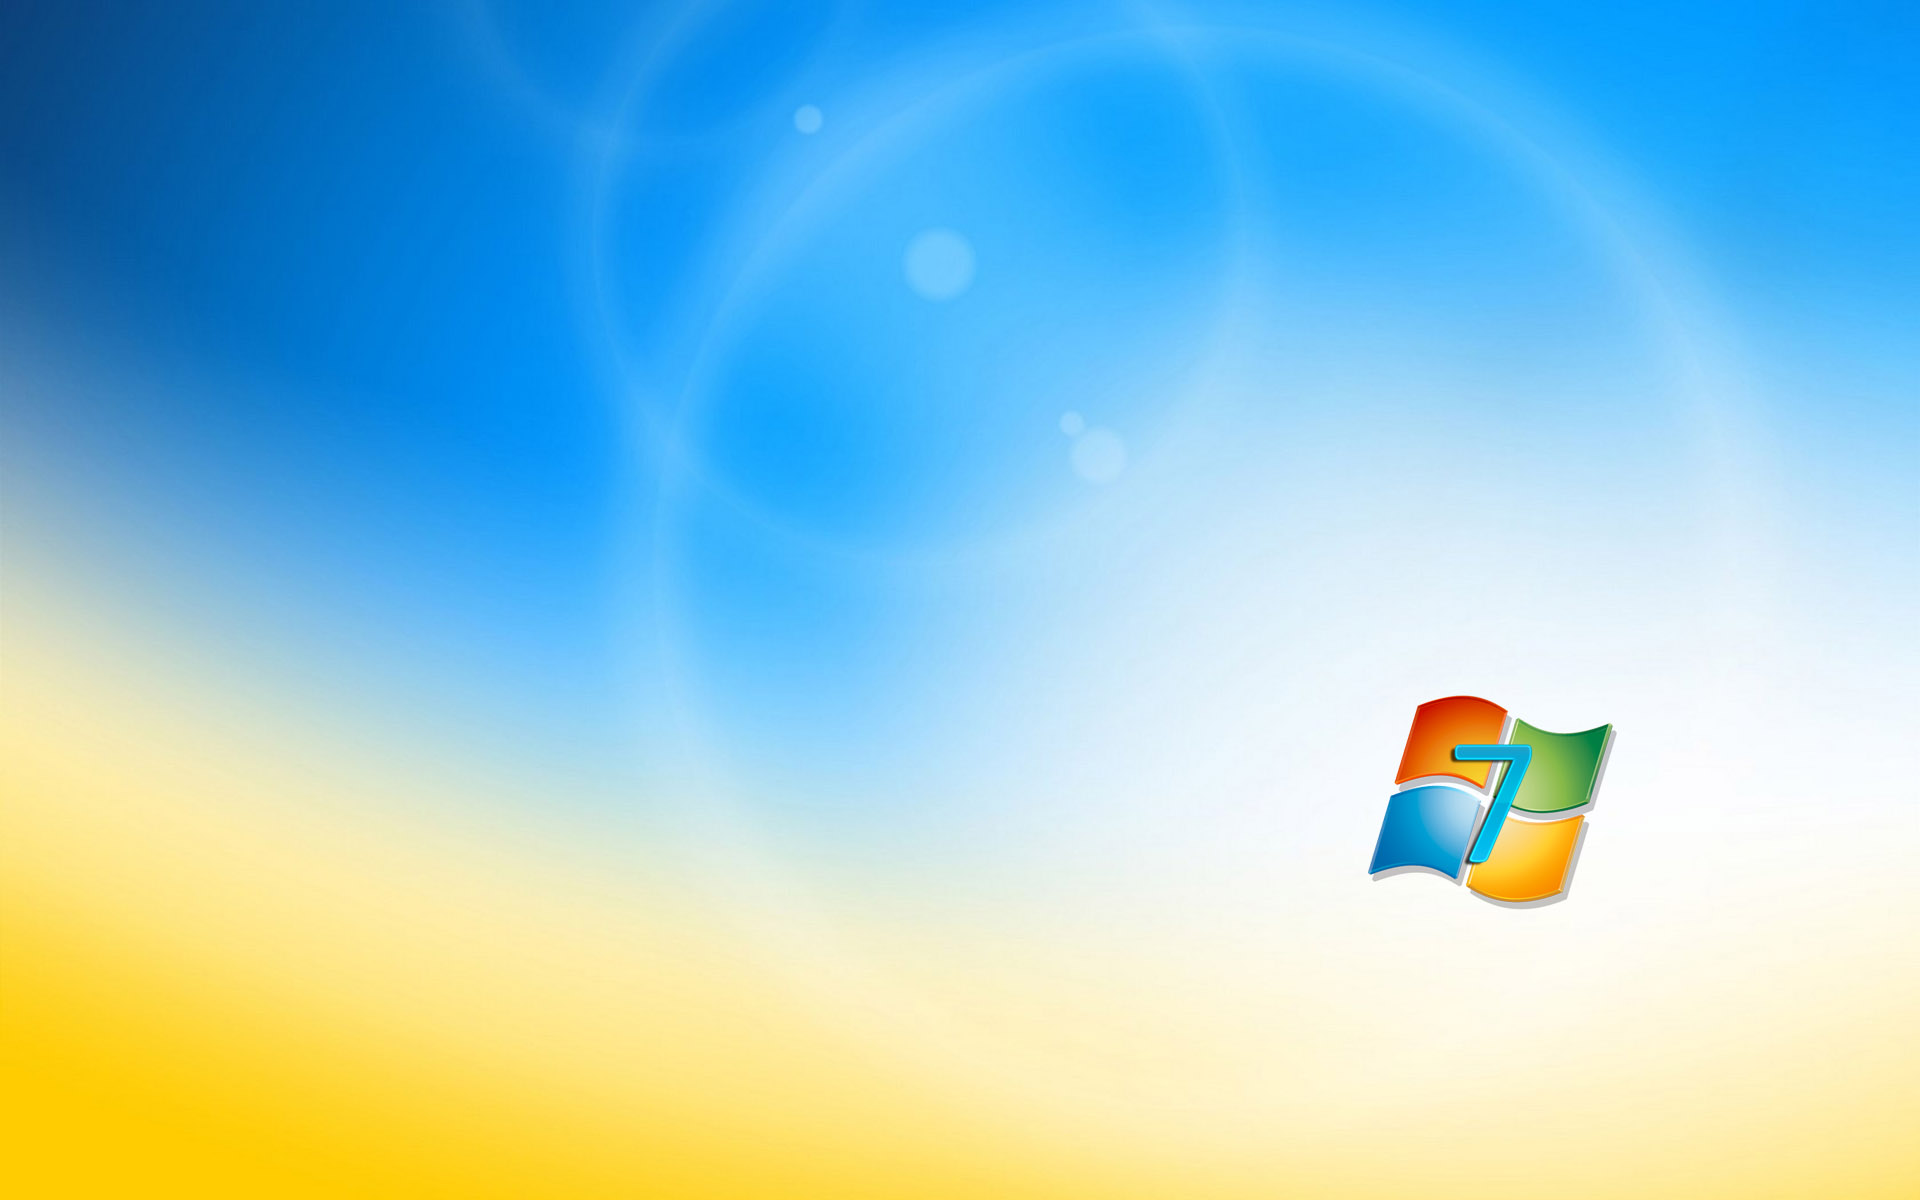 Windows 7 Images Windows 7 Free Background HD Wallpaper And